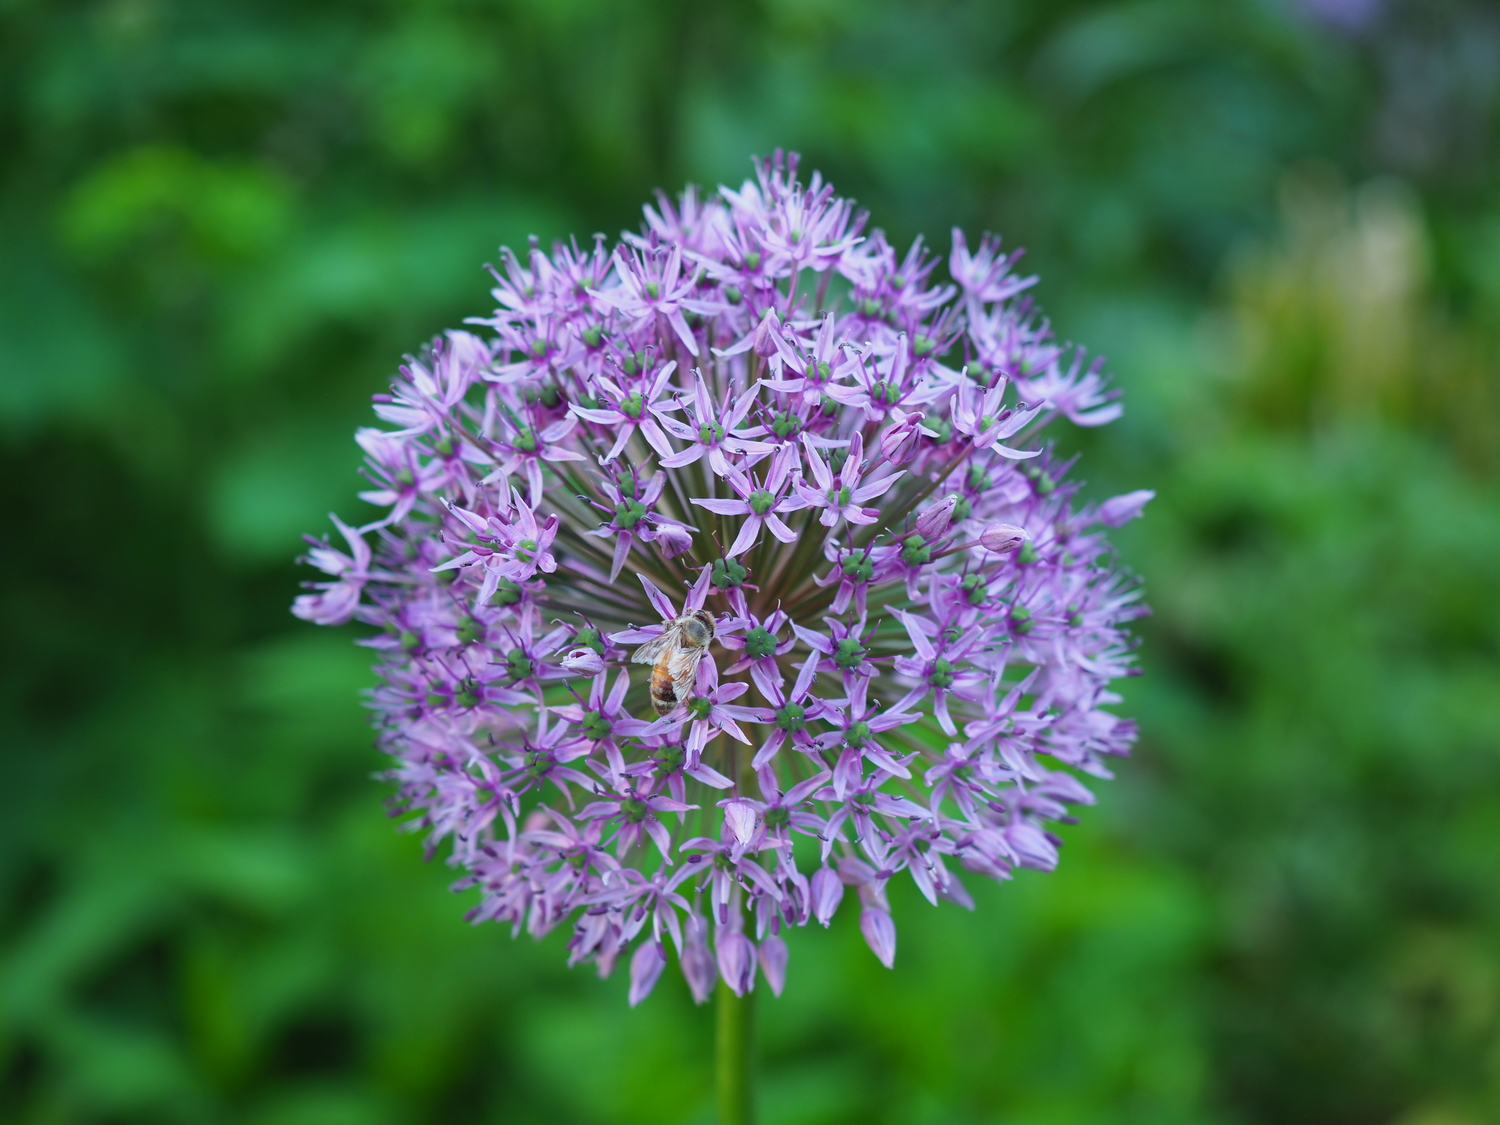 Alliums are treated as perennials but not a perennial by definition. Note the honeybee in the center. This is an early flower that supports insects that are early pollinators. ANDREW MESSINGER